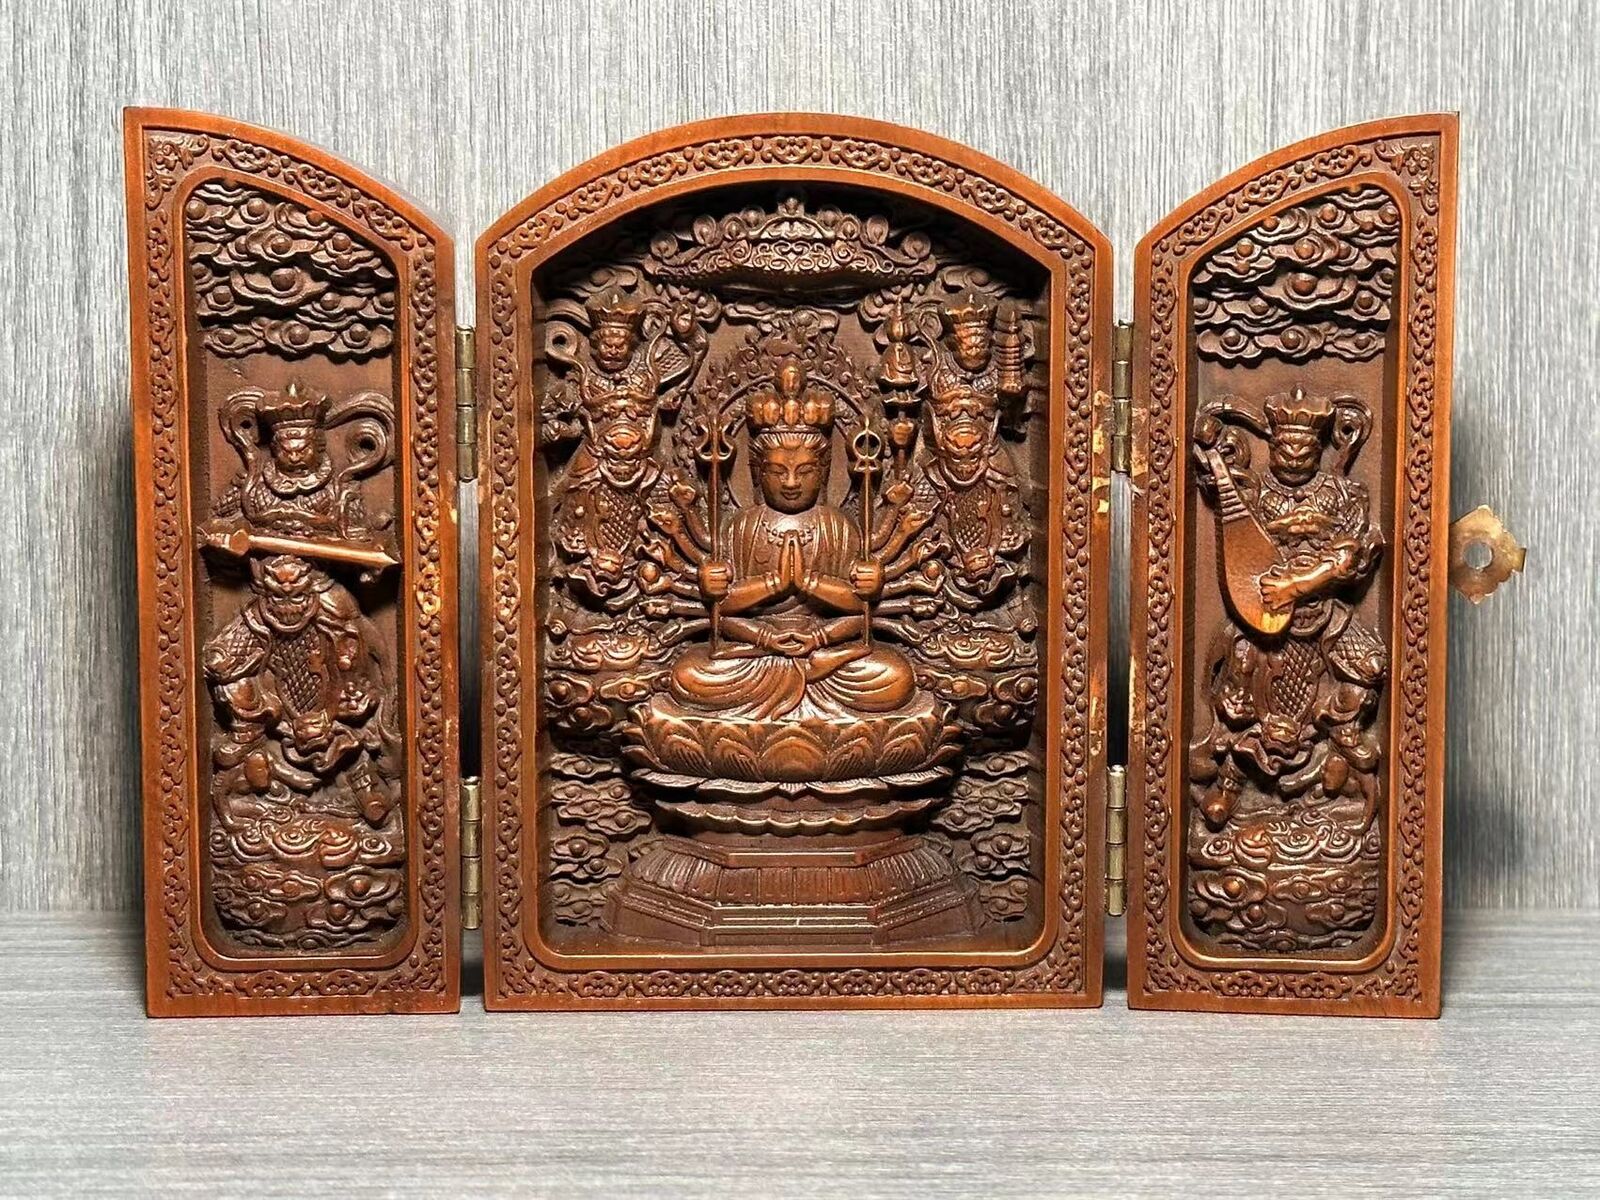 Old Antique Three Open Box Decoration - Thousand Handed Guanyin Bodhisattva